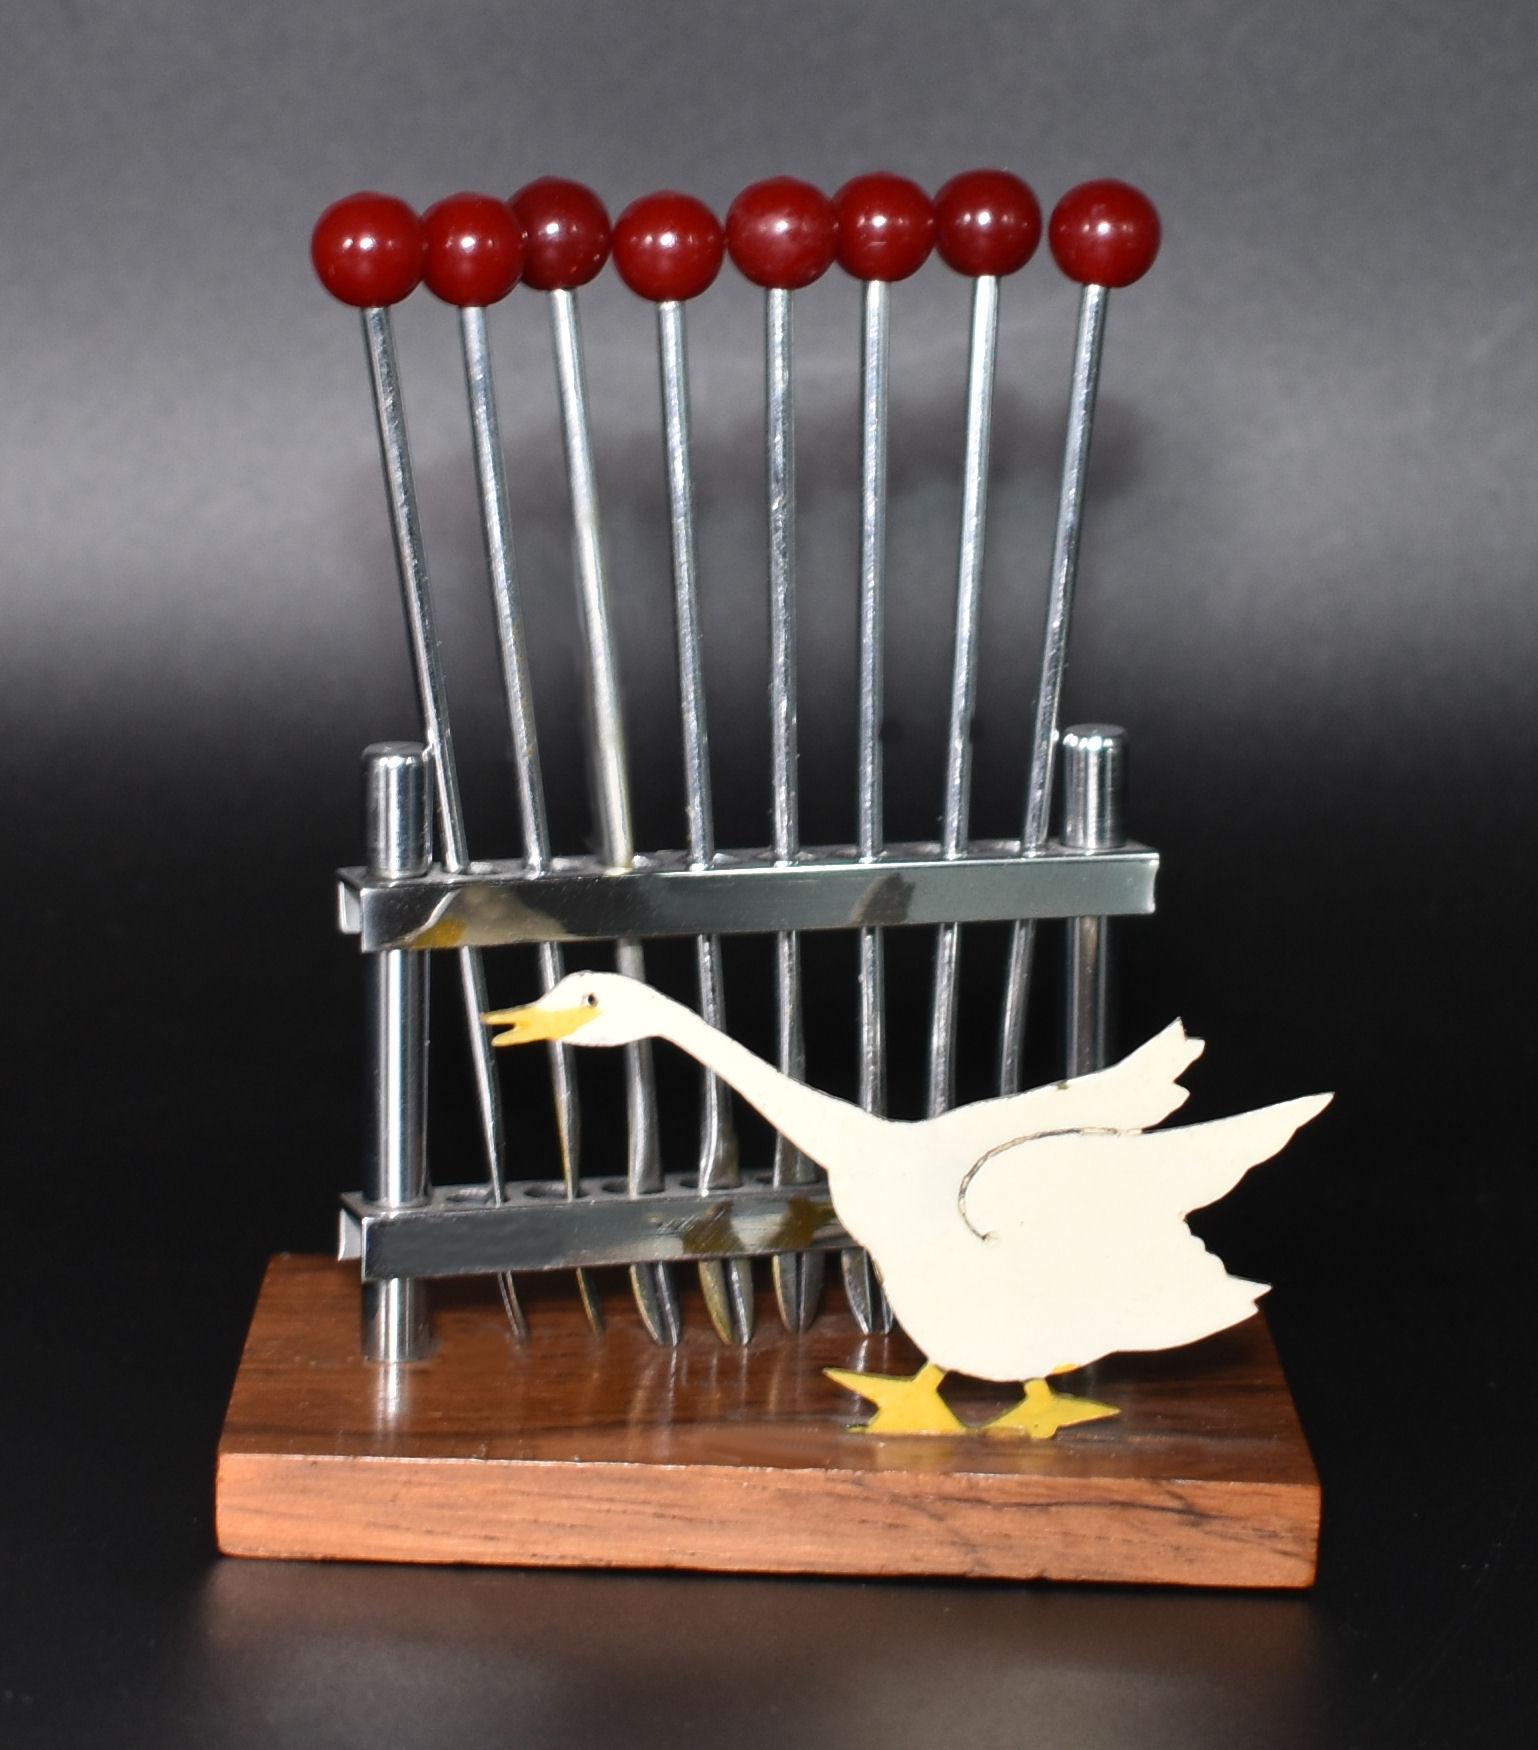 A novelty 1930s cocktail stick set in the manner of a goose, made in France. Features cherry red coloured Bakelite cocktail sticks with chromed metal prongs, all contained within a chrome box hold on a walnut base. Great set in very good condition,